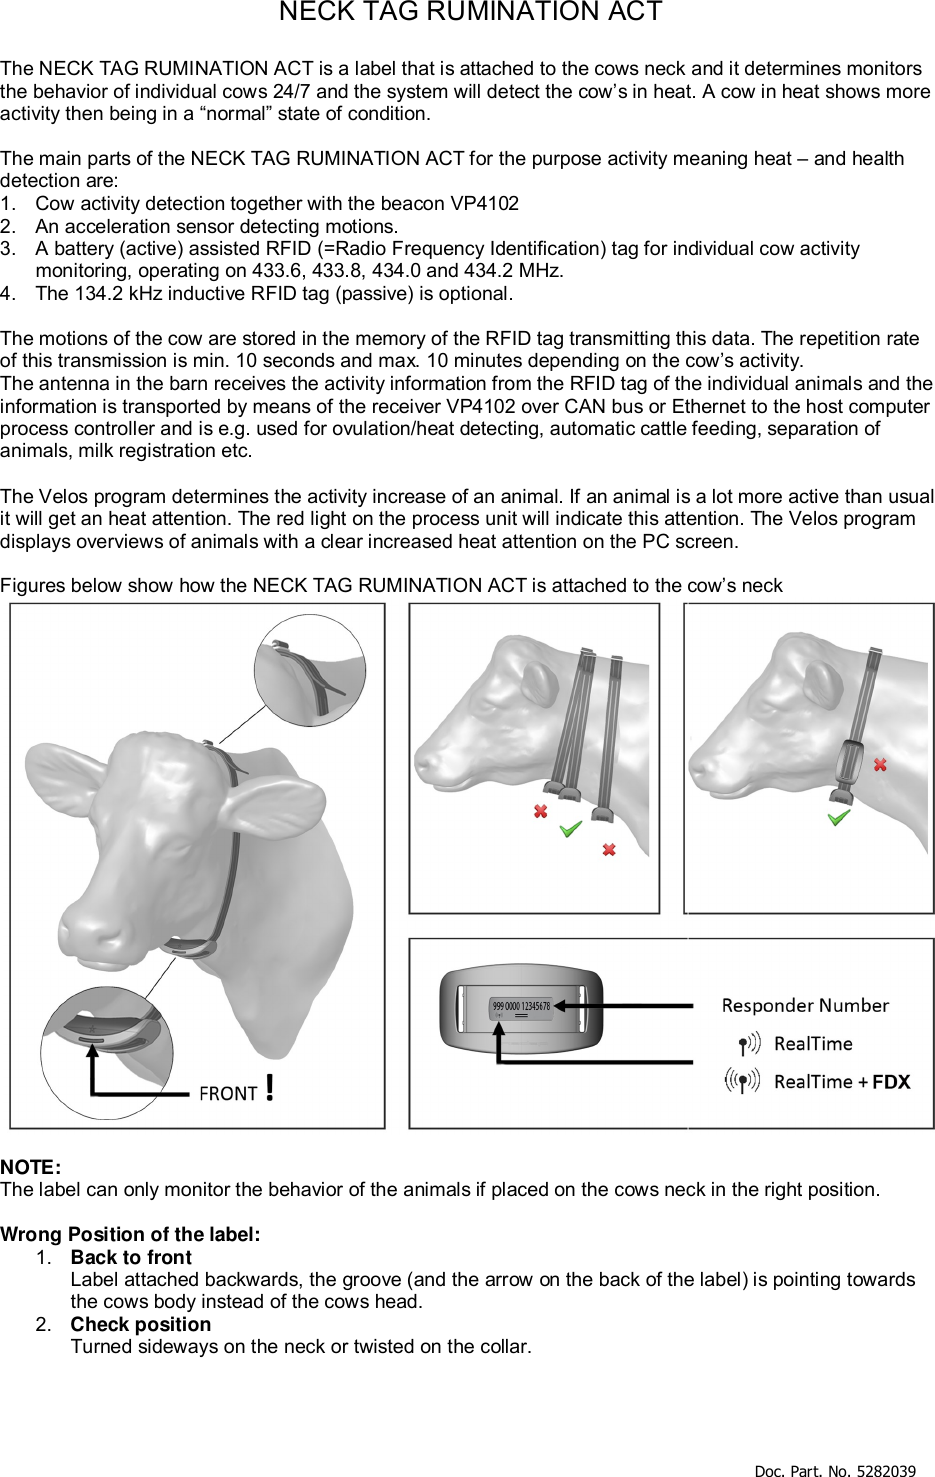     Doc. Part. No. 5282039   NECK TAG RUMINATION ACT  The NECK TAG RUMINATION ACT is a label that is attached to the cows neck and it determines monitors the behavior of individual cows 24/7 and the system will detect the cow’s in heat. A cow in heat shows more activity then being in a “normal” state of condition.  The main parts of the NECK TAG RUMINATION ACT for the purpose activity meaning heat – and health detection are: 1.  Cow activity detection together with the beacon VP4102 2.  An acceleration sensor detecting motions. 3.  A battery (active) assisted RFID (=Radio Frequency Identification) tag for individual cow activity monitoring, operating on 433.6, 433.8, 434.0 and 434.2 MHz. 4.  The 134.2 kHz inductive RFID tag (passive) is optional.  The motions of the cow are stored in the memory of the RFID tag transmitting this data. The repetition rate of this transmission is min. 10 seconds and max. 10 minutes depending on the cow’s activity. The antenna in the barn receives the activity information from the RFID tag of the individual animals and the information is transported by means of the receiver VP4102 over CAN bus or Ethernet to the host computer process controller and is e.g. used for ovulation/heat detecting, automatic cattle feeding, separation of animals, milk registration etc.  The Velos program determines the activity increase of an animal. If an animal is a lot more active than usual it will get an heat attention. The red light on the process unit will indicate this attention. The Velos program displays overviews of animals with a clear increased heat attention on the PC screen.  Figures below show how the NECK TAG RUMINATION ACT is attached to the cow’s neck   NOTE:  The label can only monitor the behavior of the animals if placed on the cows neck in the right position.   Wrong Position of the label: 1.  Back to front Label attached backwards, the groove (and the arrow on the back of the label) is pointing towards the cows body instead of the cows head. 2.  Check position Turned sideways on the neck or twisted on the collar.  